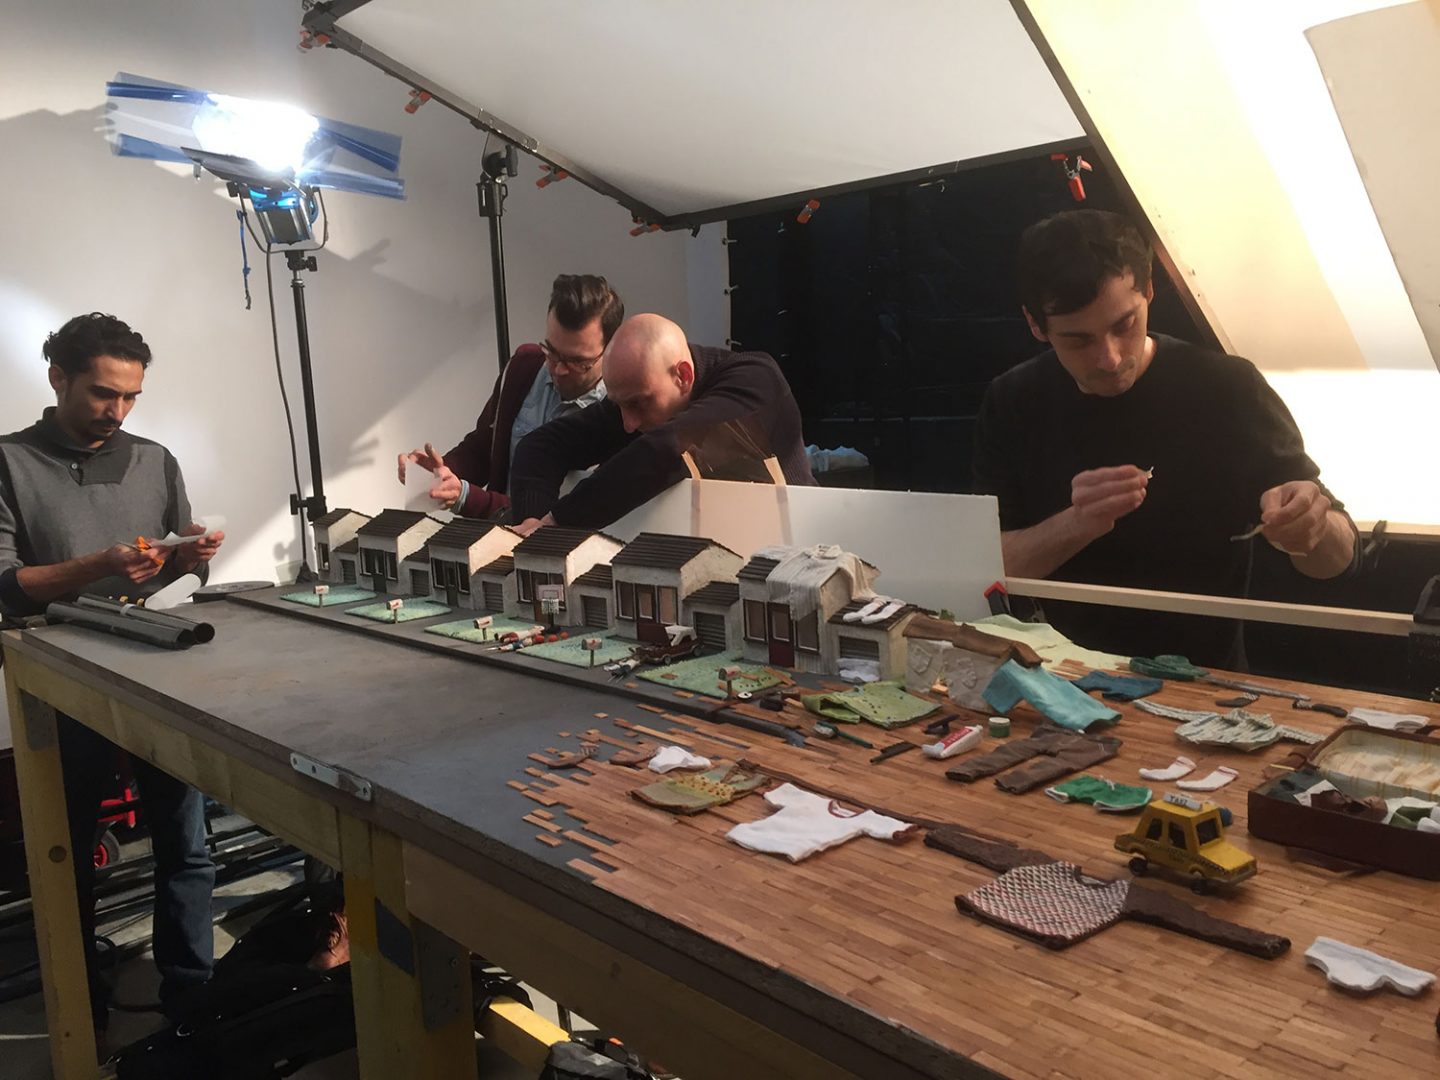 One of the largest sets - the pan of suburb - being lit. The team is using gels and gaffer tape to control small lighting details. From left: Walid Païenda (production assistant). Simon Gesrel (cinematographer), Jean-Louis Padis (co-producer), and Max Porter (co-director).